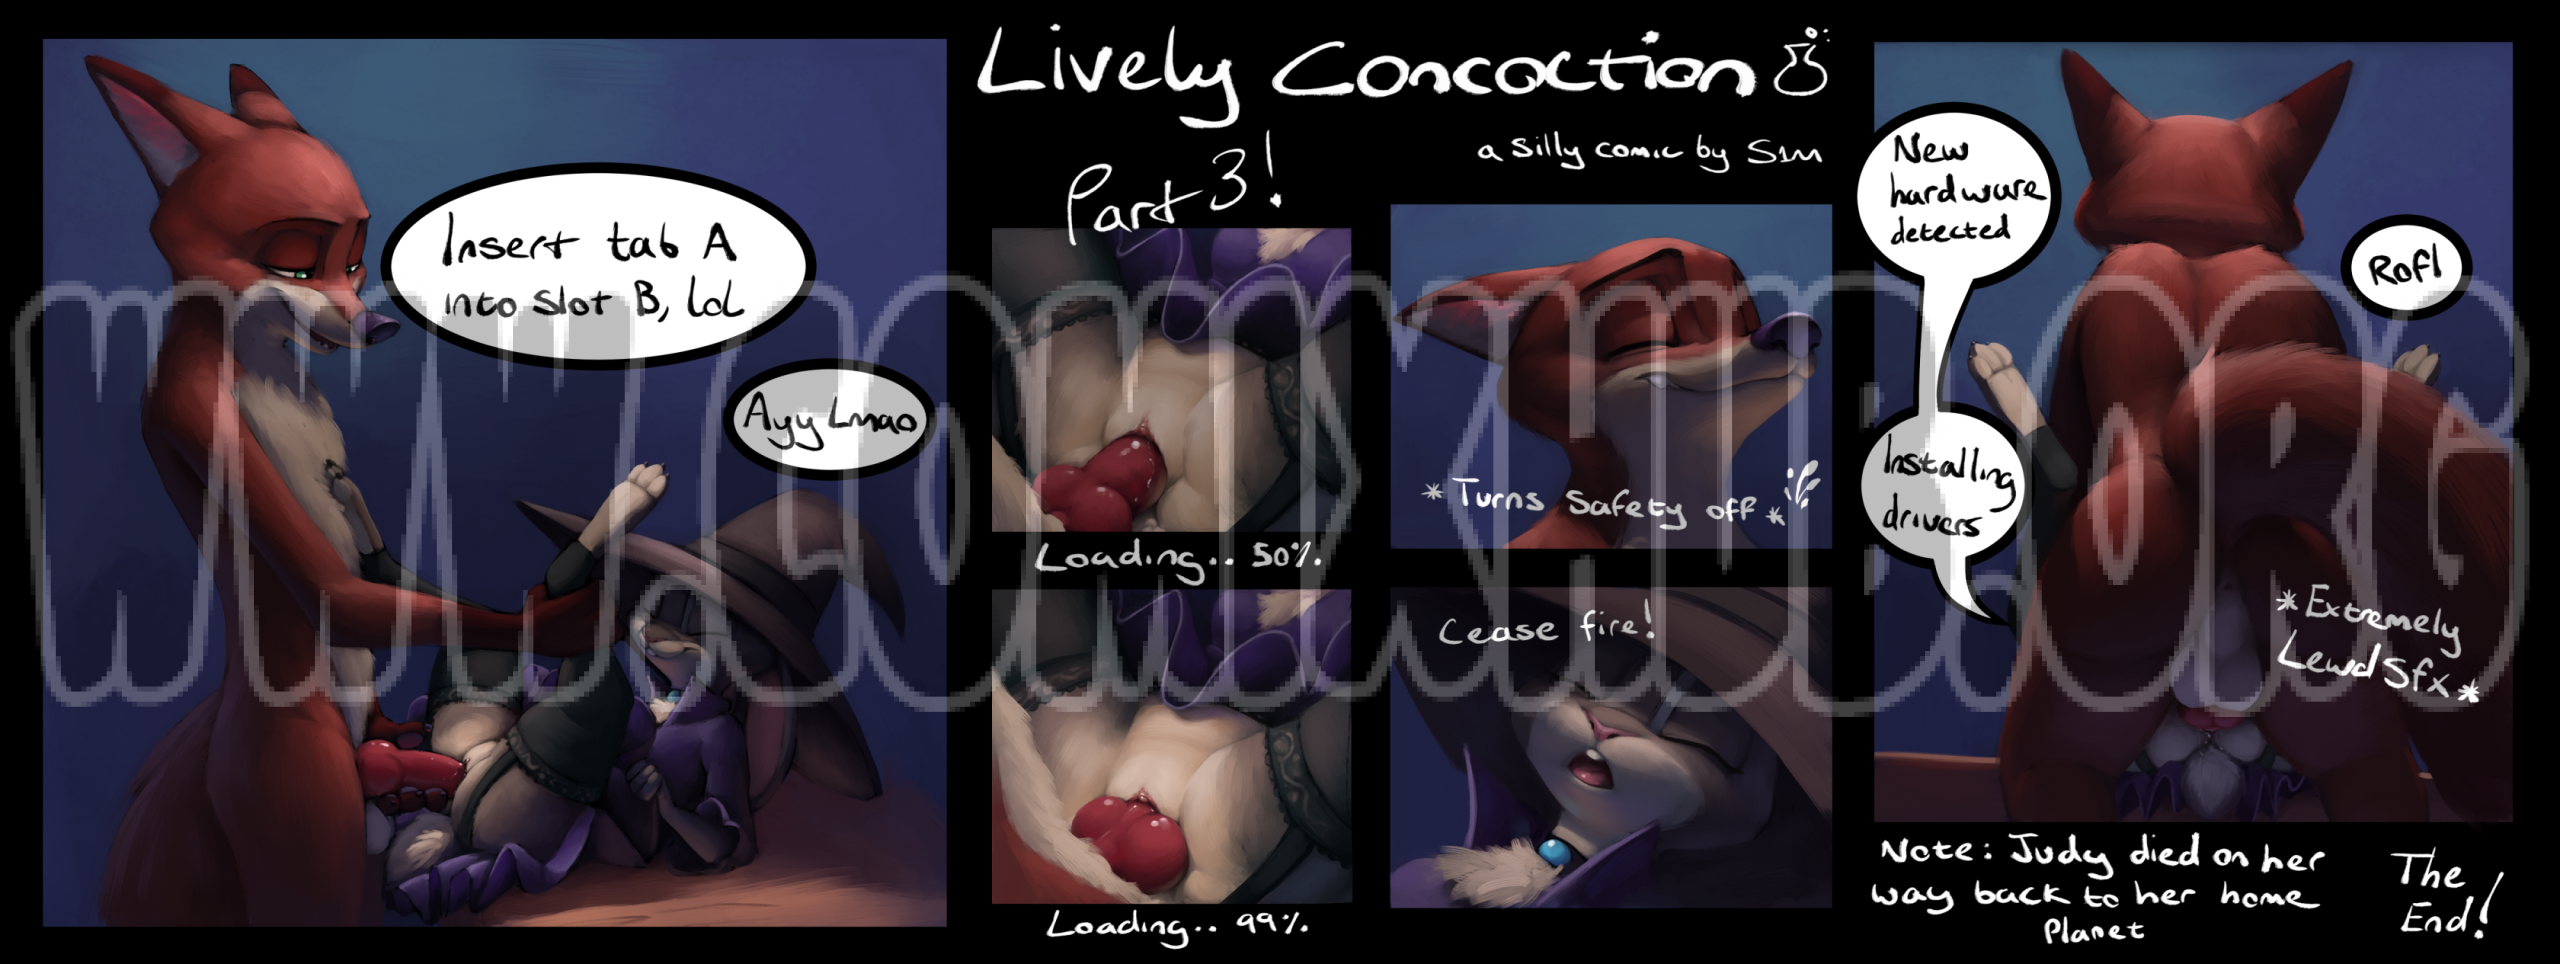 Lively Concoction porn comics Oral sex, Creampie, Furry, Stockings, Straight